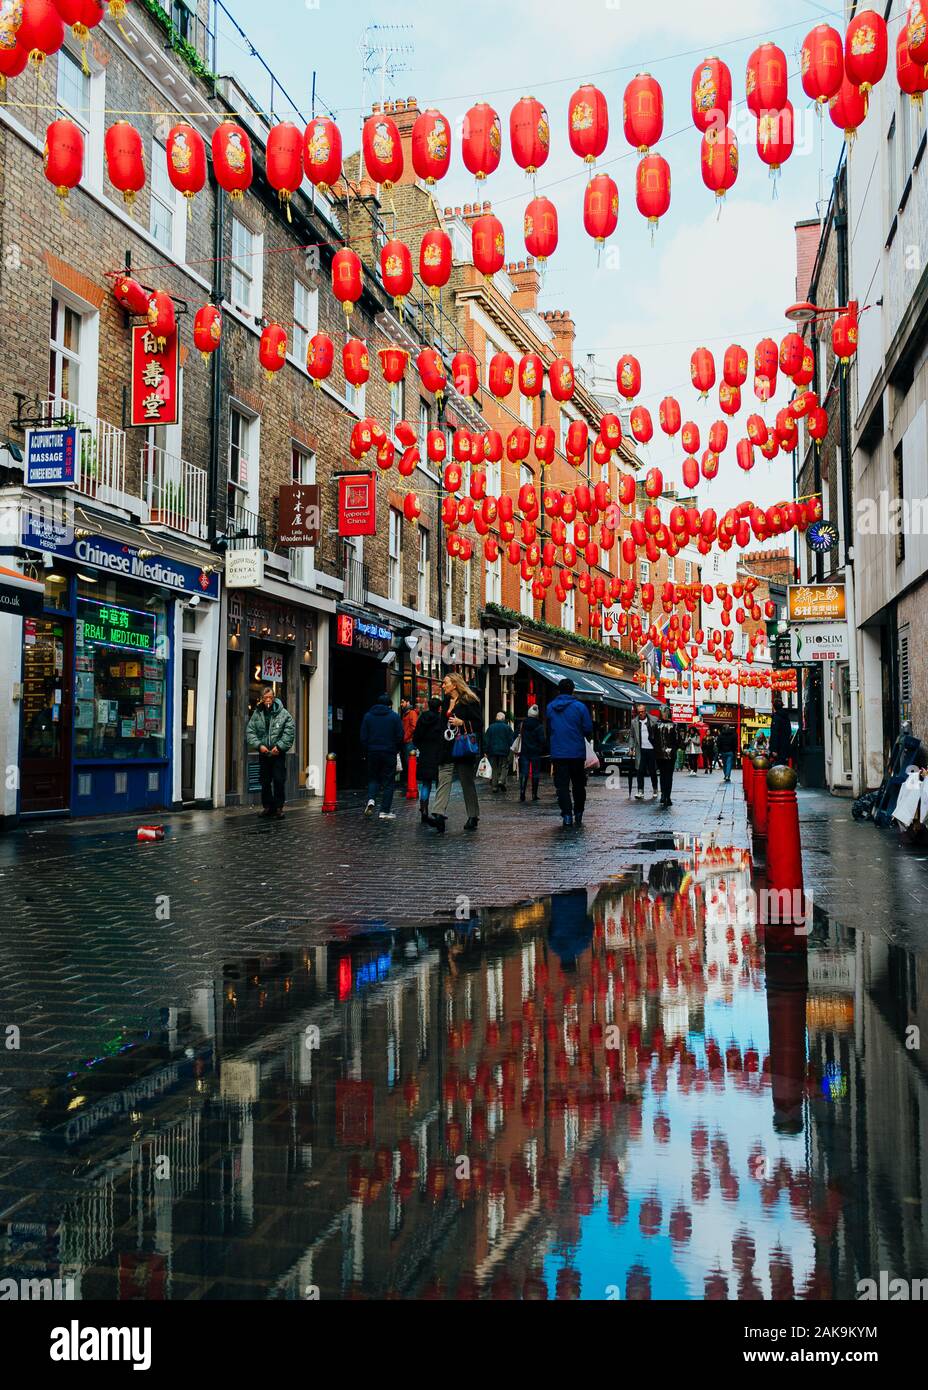 London, UK/Europe; 20/12/2019: Chinatown street full of chinese red lanterns, shops, restaurants and people walking and shopping. Soho district in Lon Stock Photo